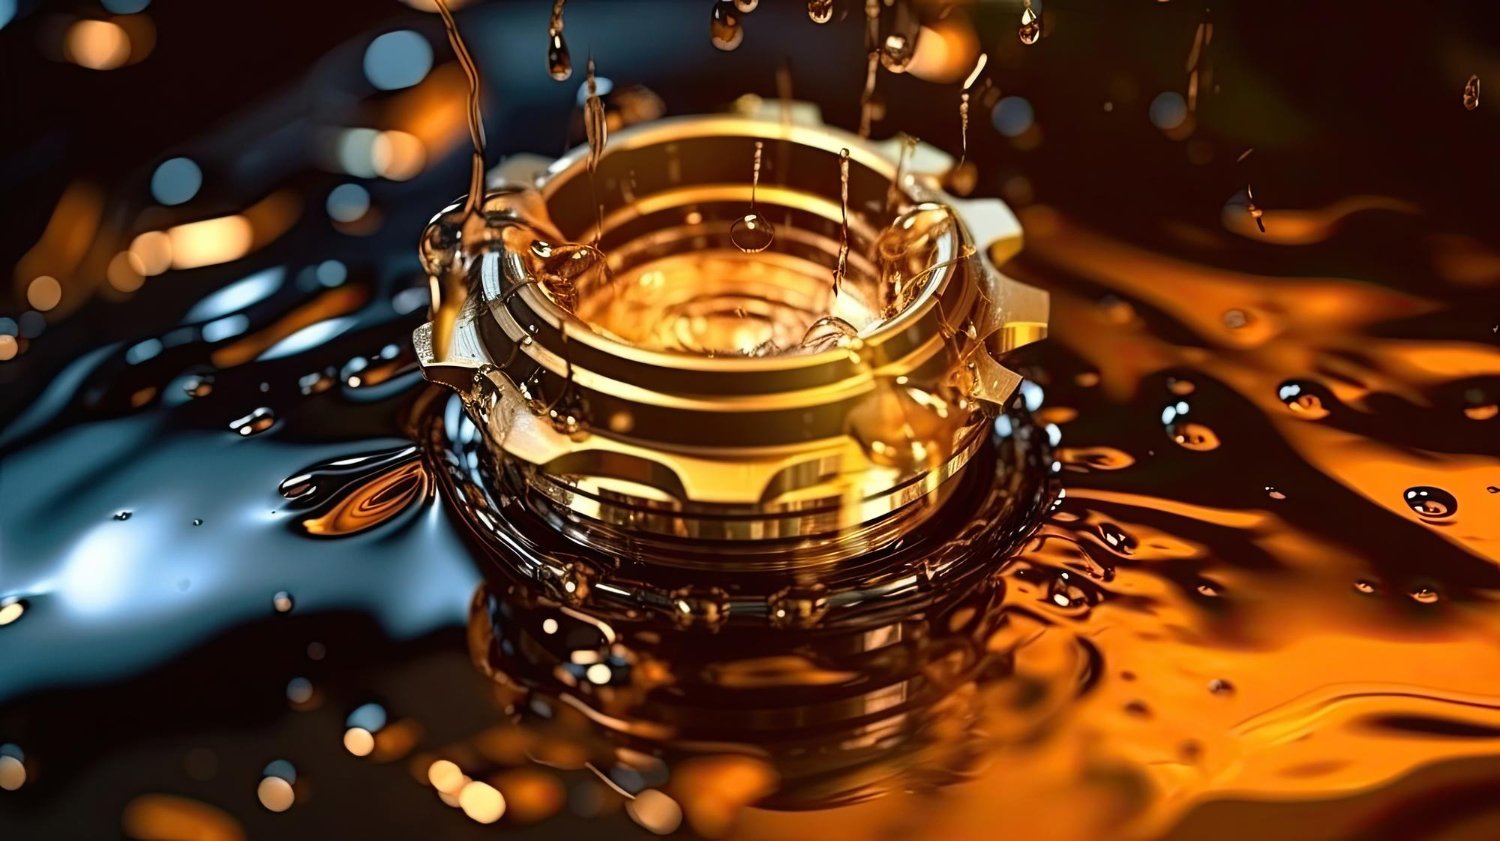 Hydro Lubricants: A Paradigm Shift in Sustainable Gear Maintenance